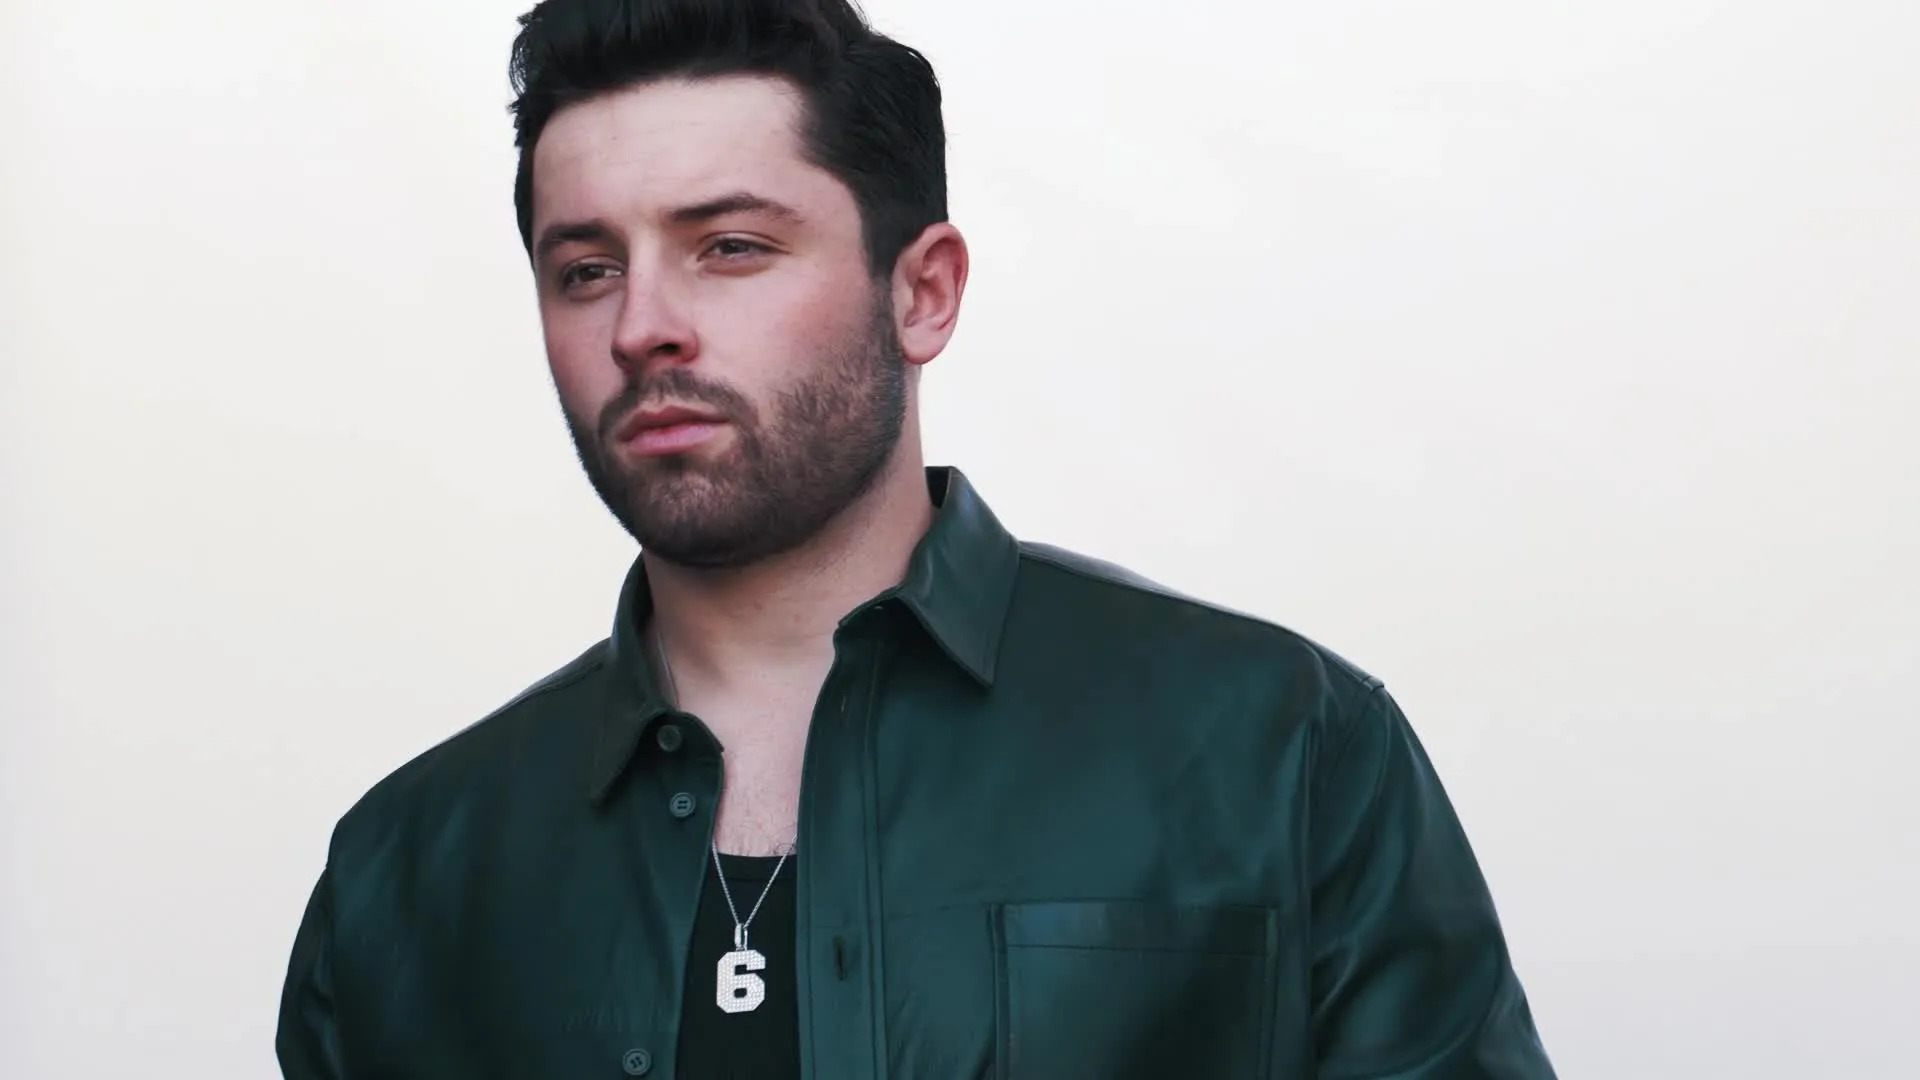 Baker Mayfield Is Wearing A Green Colored Shirt And A No. 6 Necklace